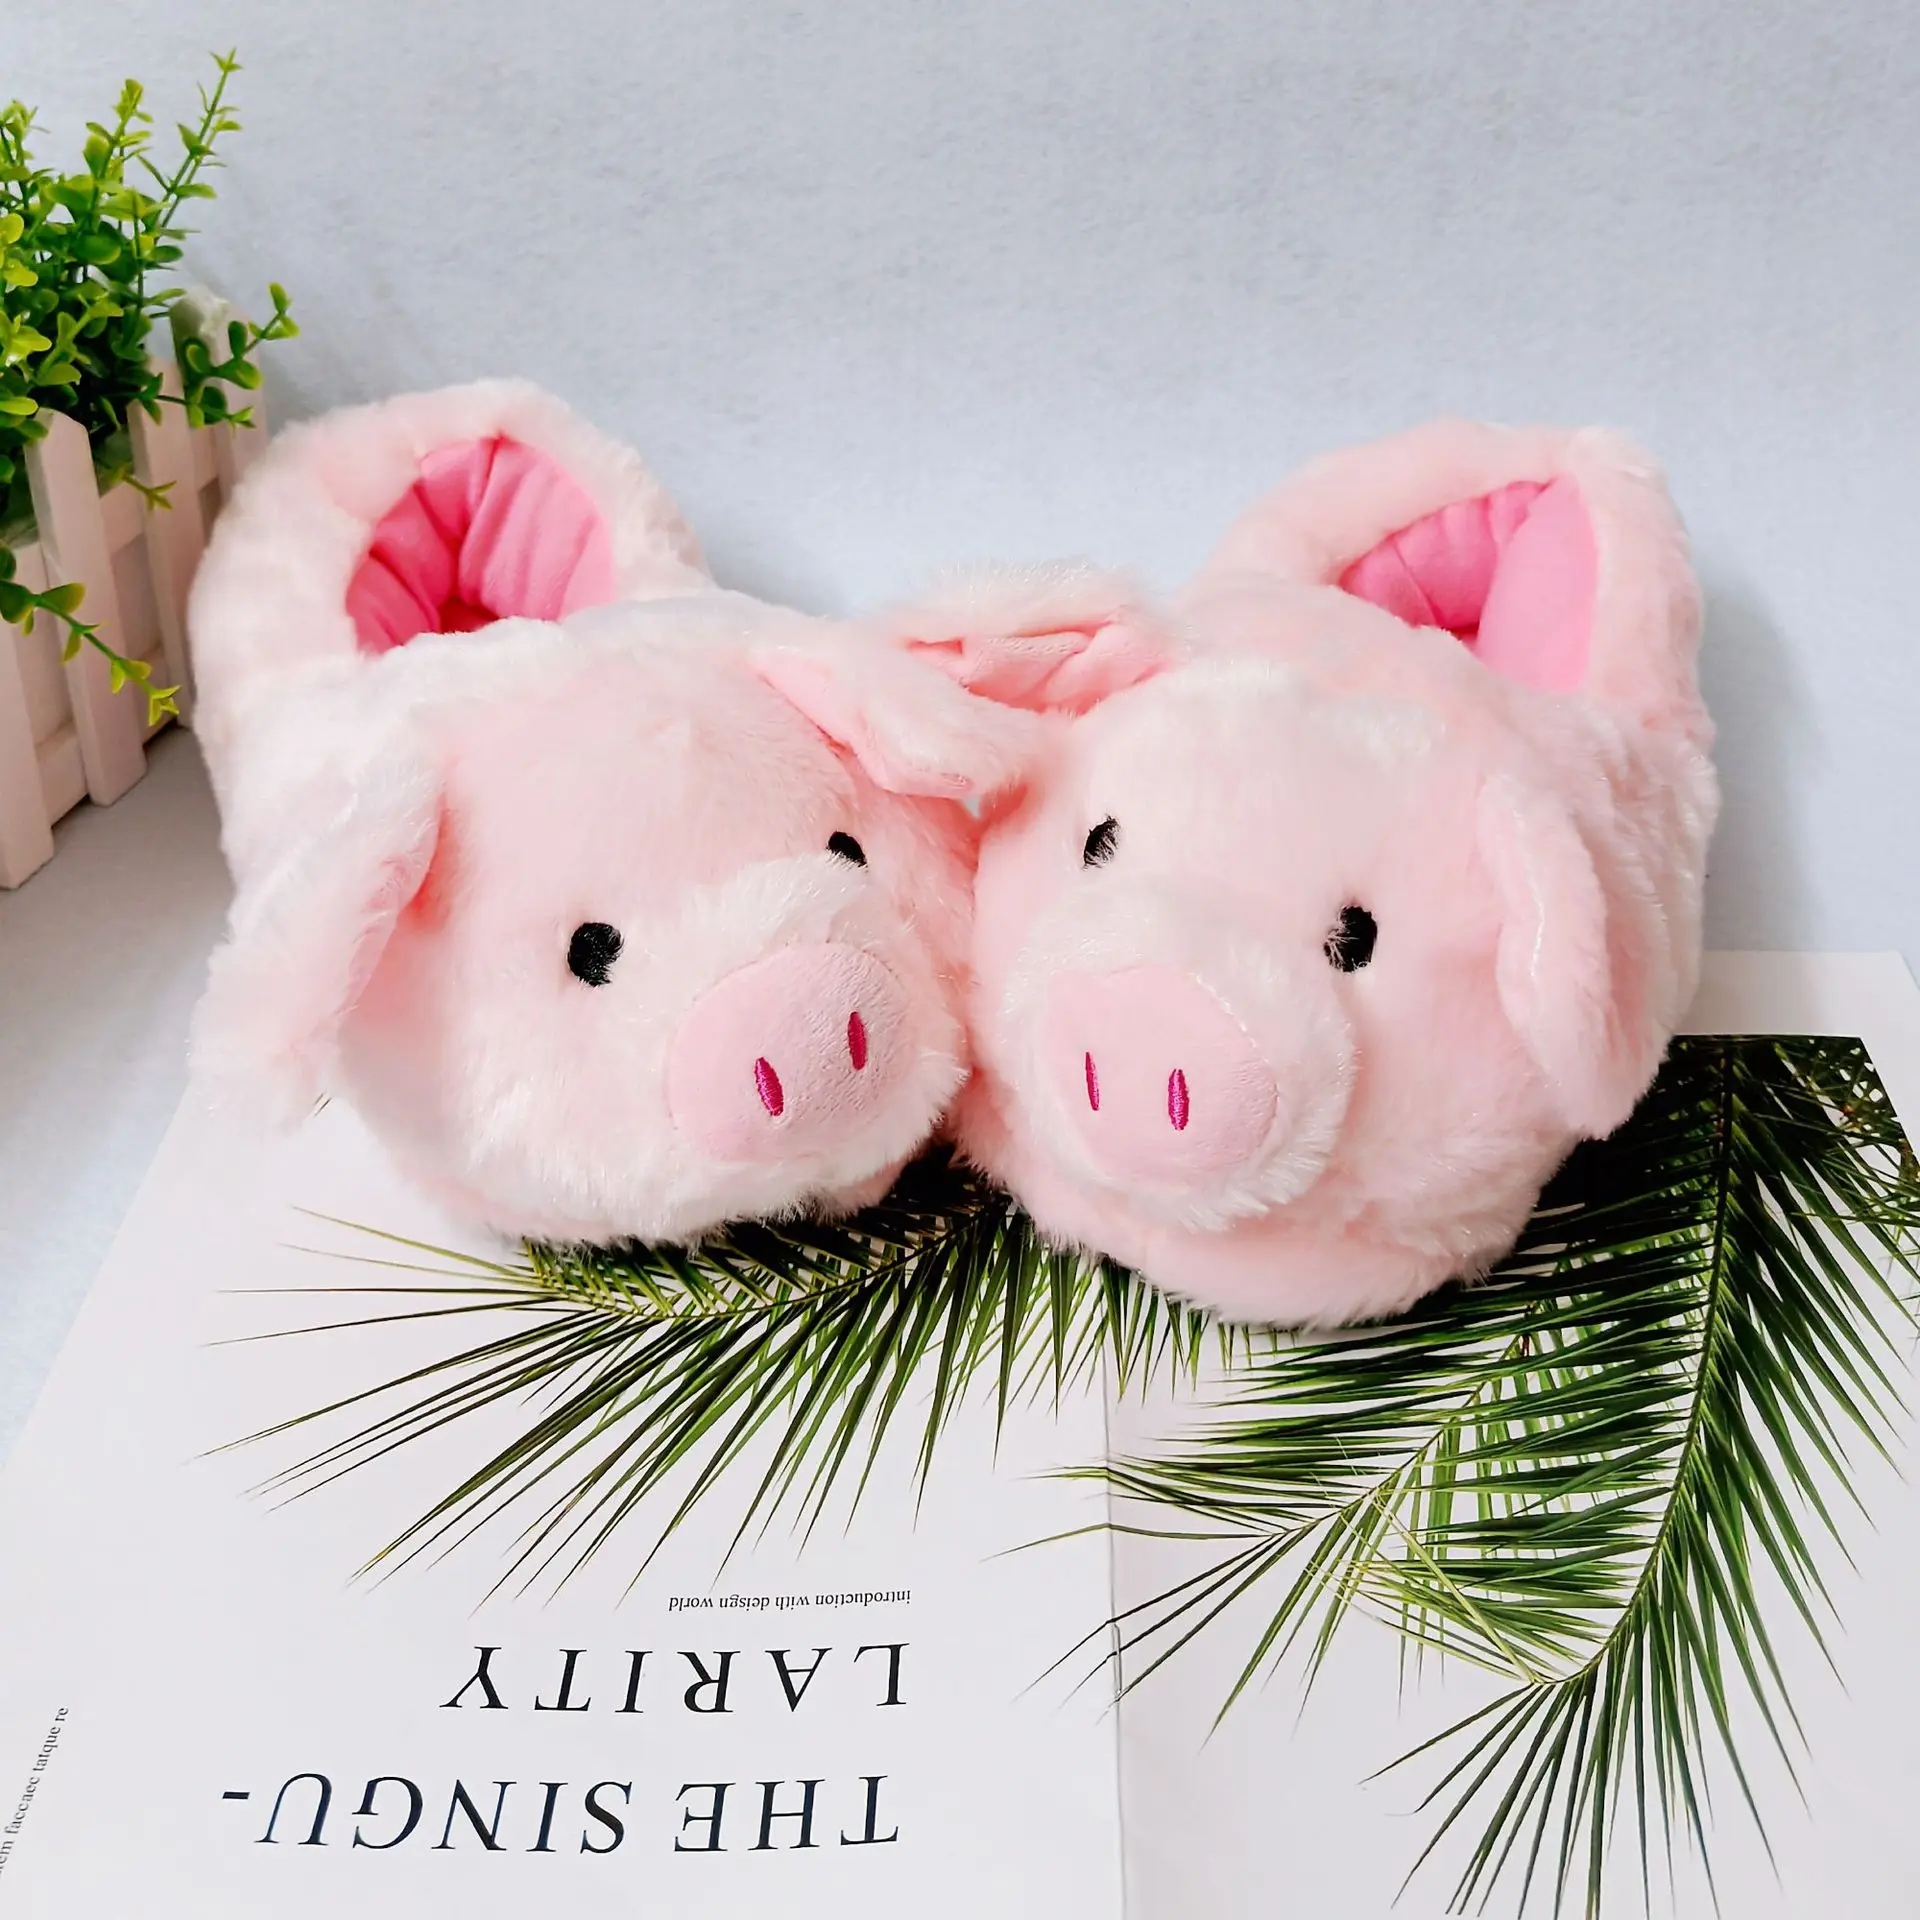 2022 Ins Hot Cartoon Pig Cotton Shoes Girls Pink Slip On Fluffy Slipper Woman Creative Piggy Slides Loafers Shoes